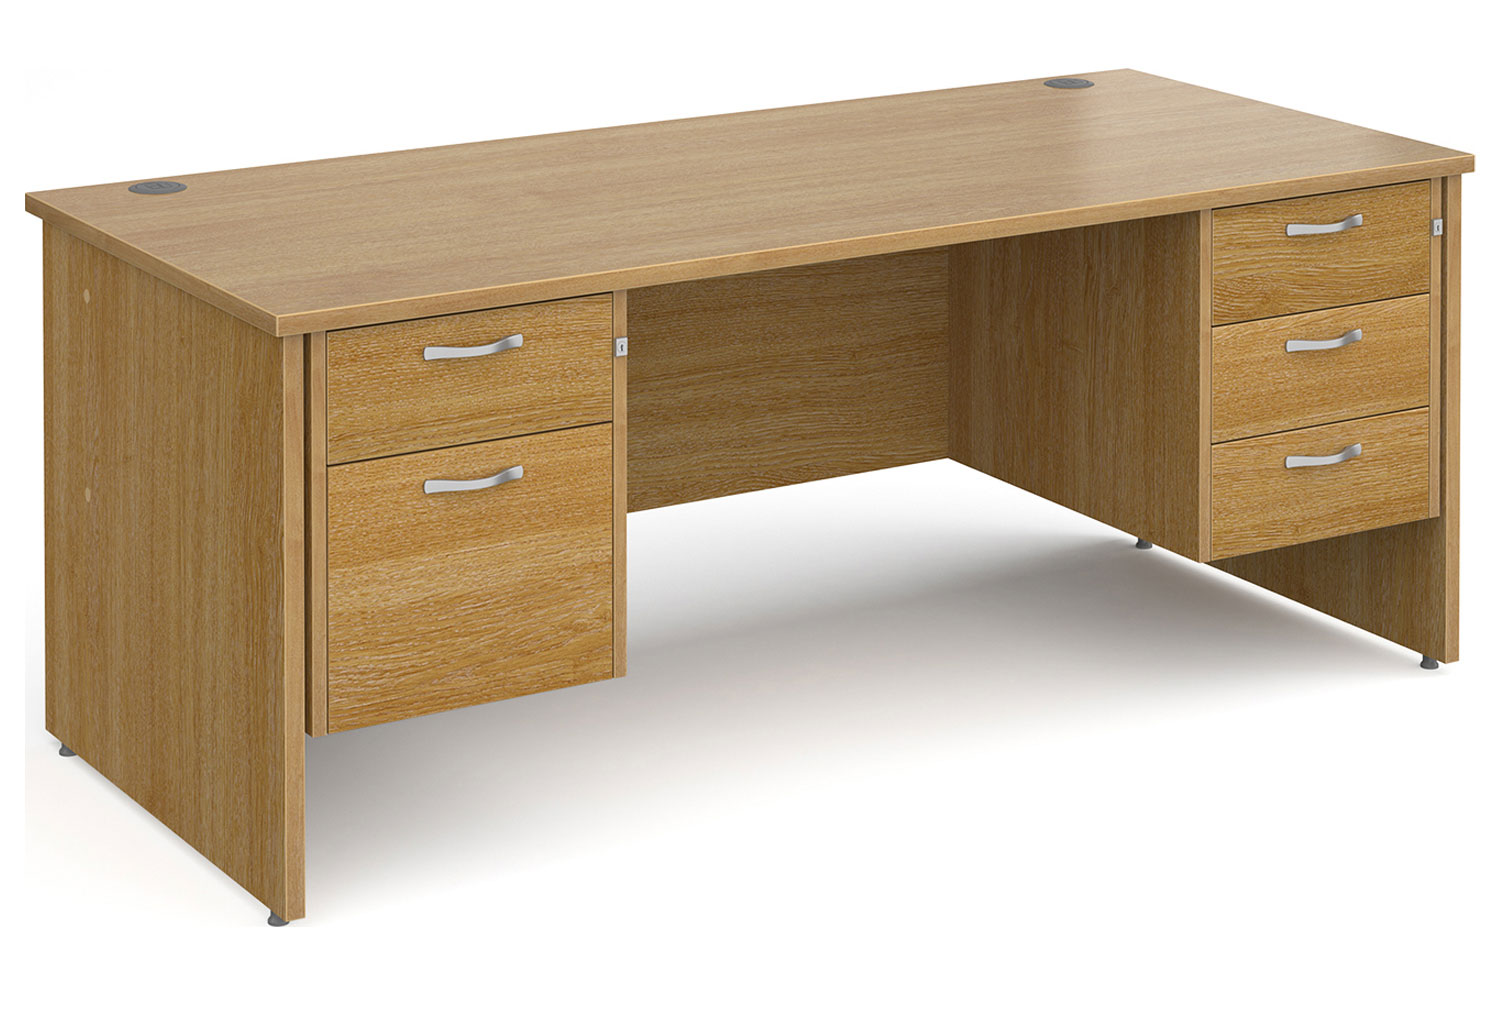 All Oak Panel End Executive Office Desk 2+3 Drawers, 180wx80dx73h (cm), Fully Installed